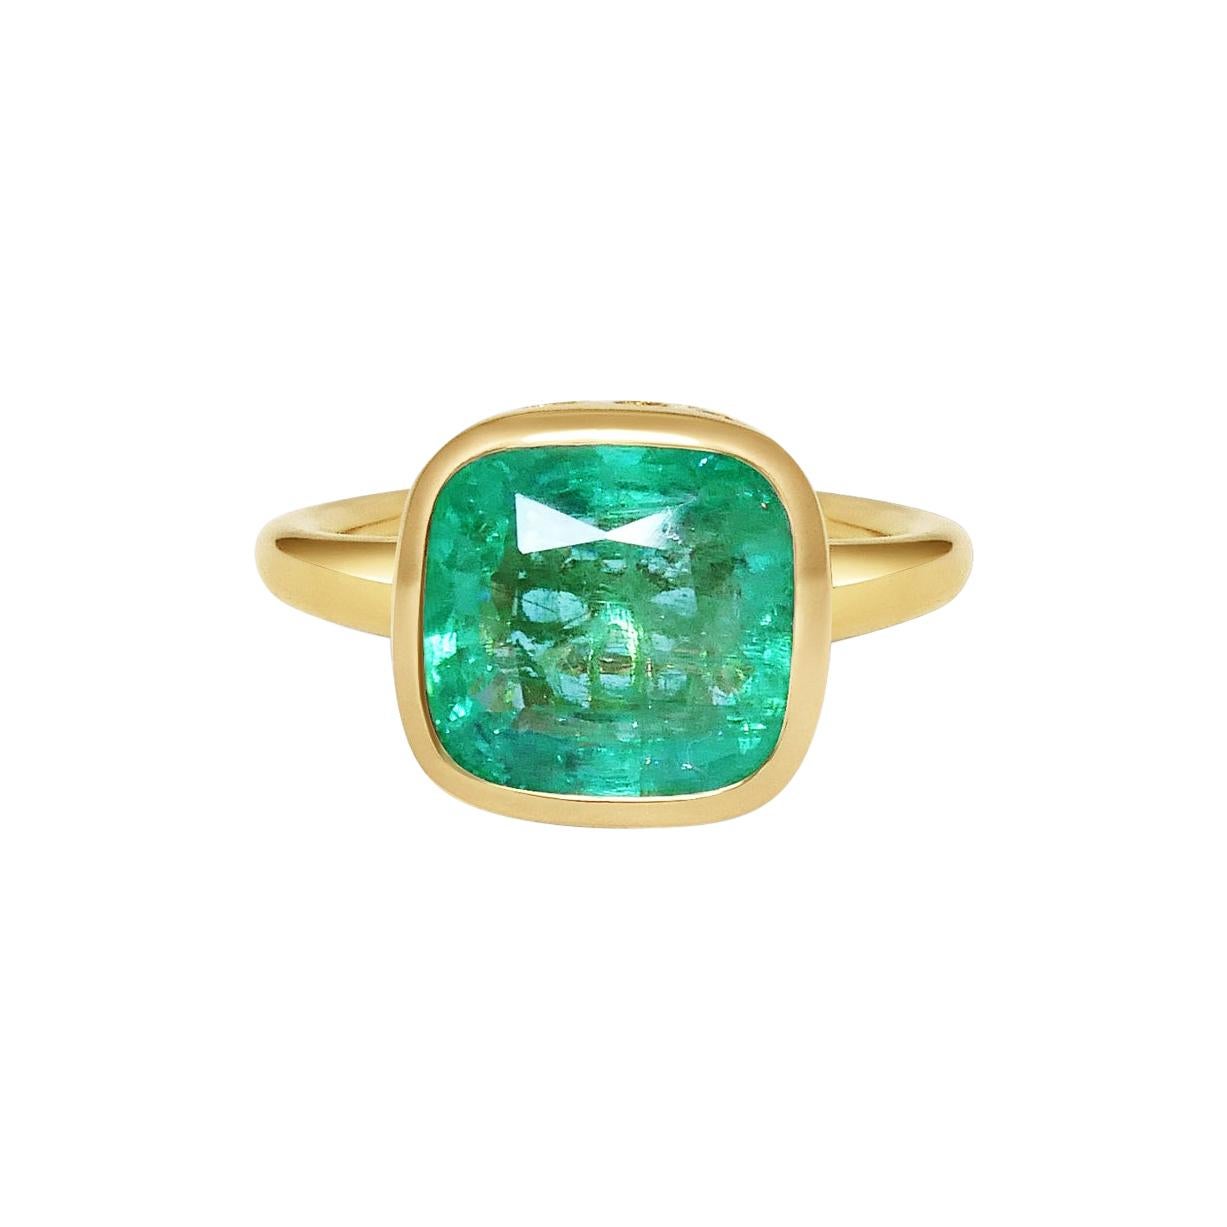 Handcrafted Cushion Cut 9.39 Carats Emerald 18 Karat Yellow Gold Cocktail Ring